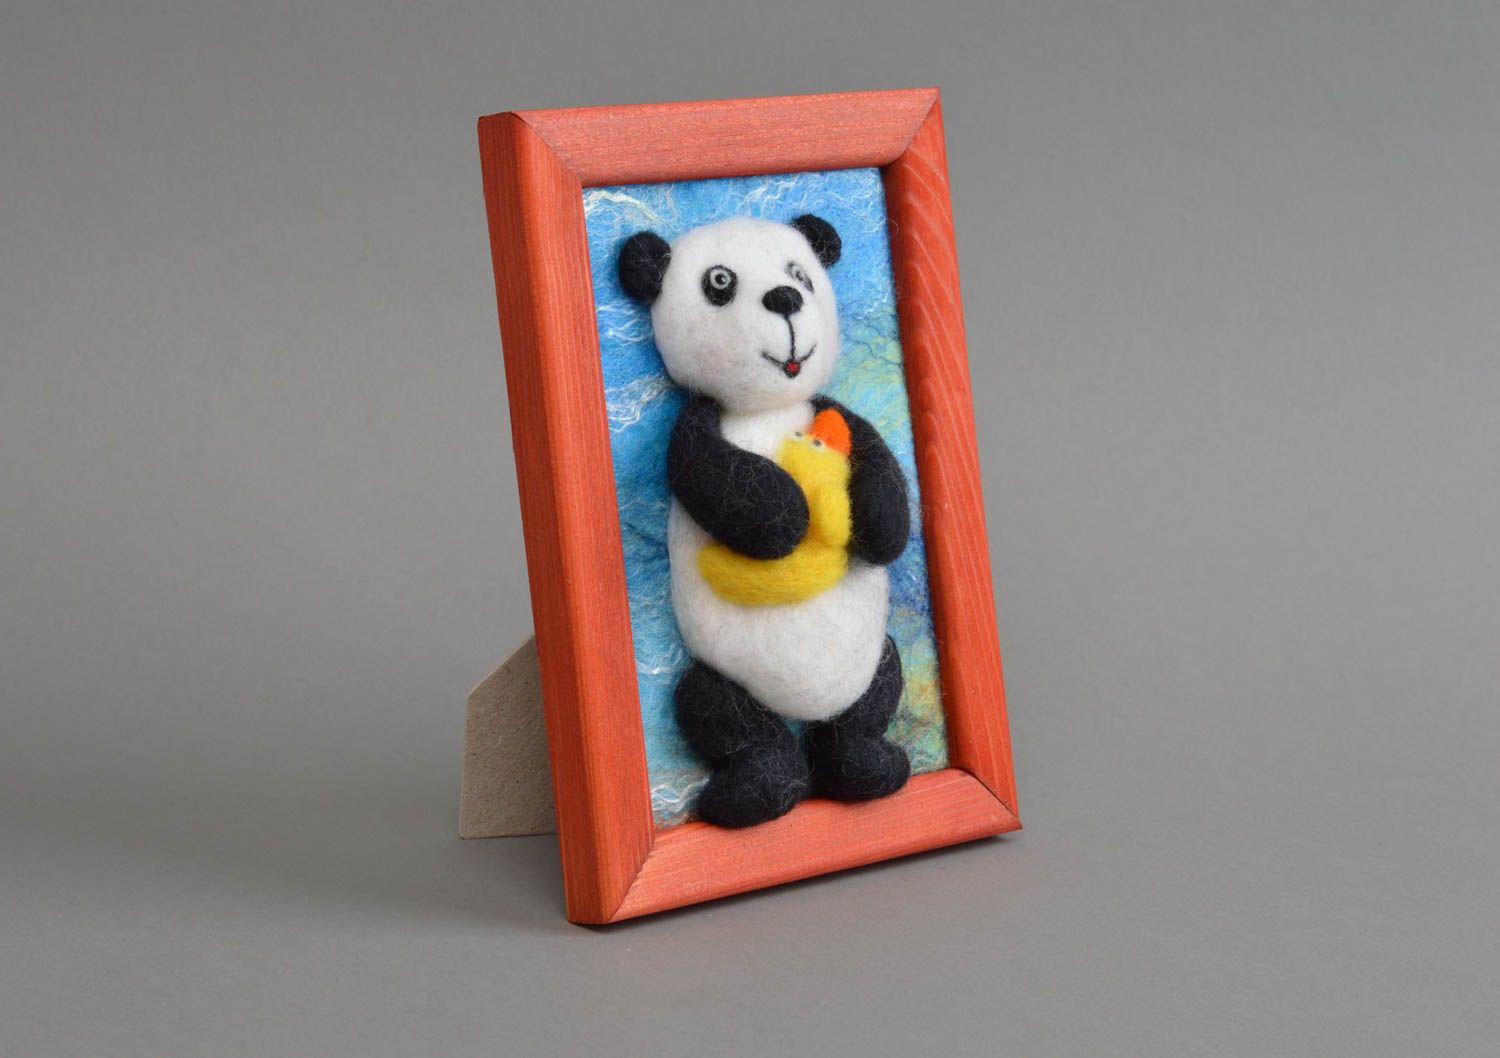 Picture in frame handmade nursery decor table decor woolen toy for children photo 2